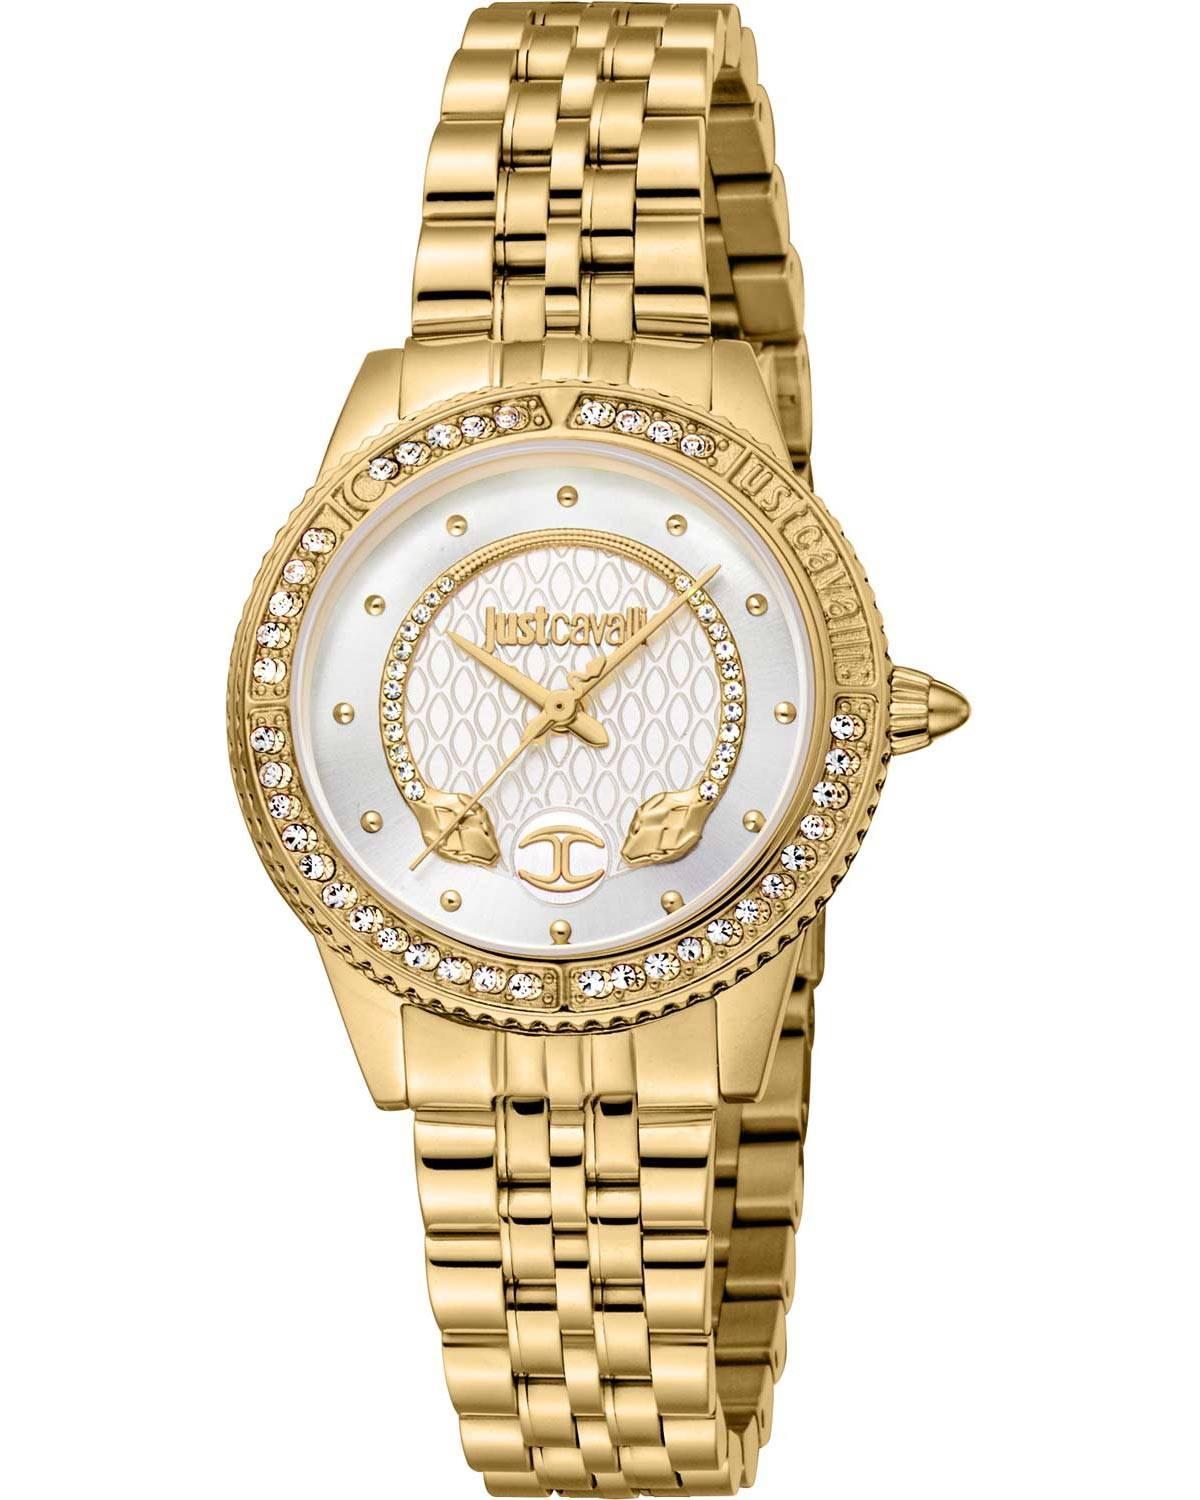 JUST CAVALLI Snake Crystals - JC1L275M0045, Gold case with Stainless Steel Bracelet